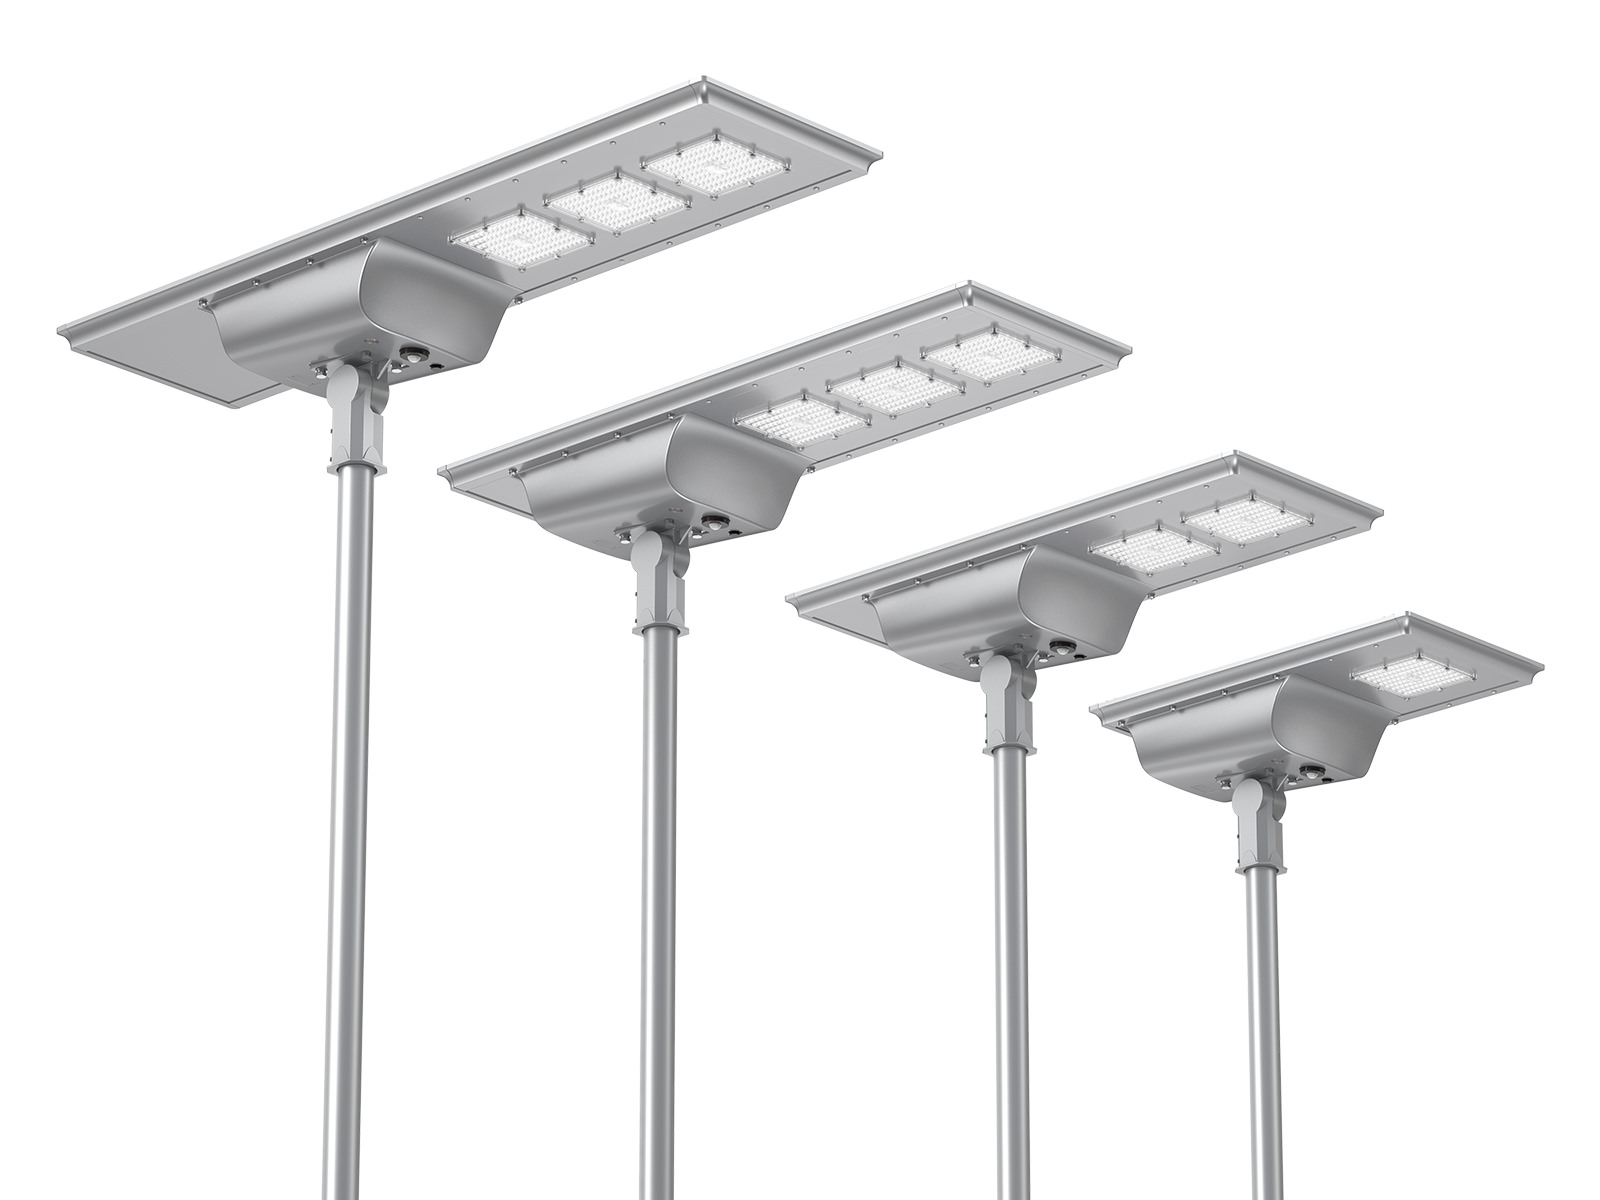 III. Components of Integrated Solar Street Lights